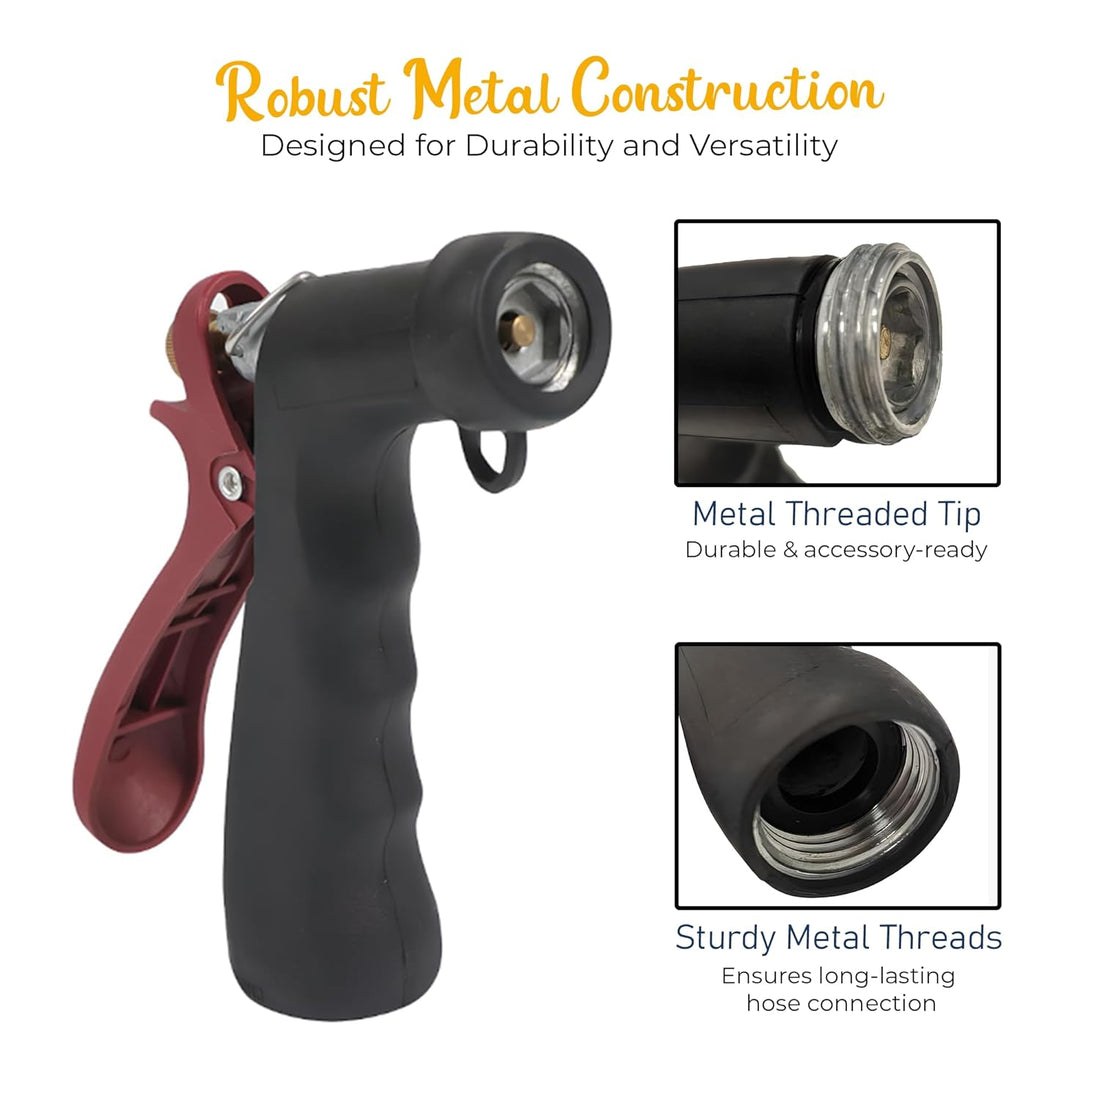 Industrial Nozzle - Heavy-Duty Hot or Cold Water Hose Nozzle, Enhanced Comfort & Durability